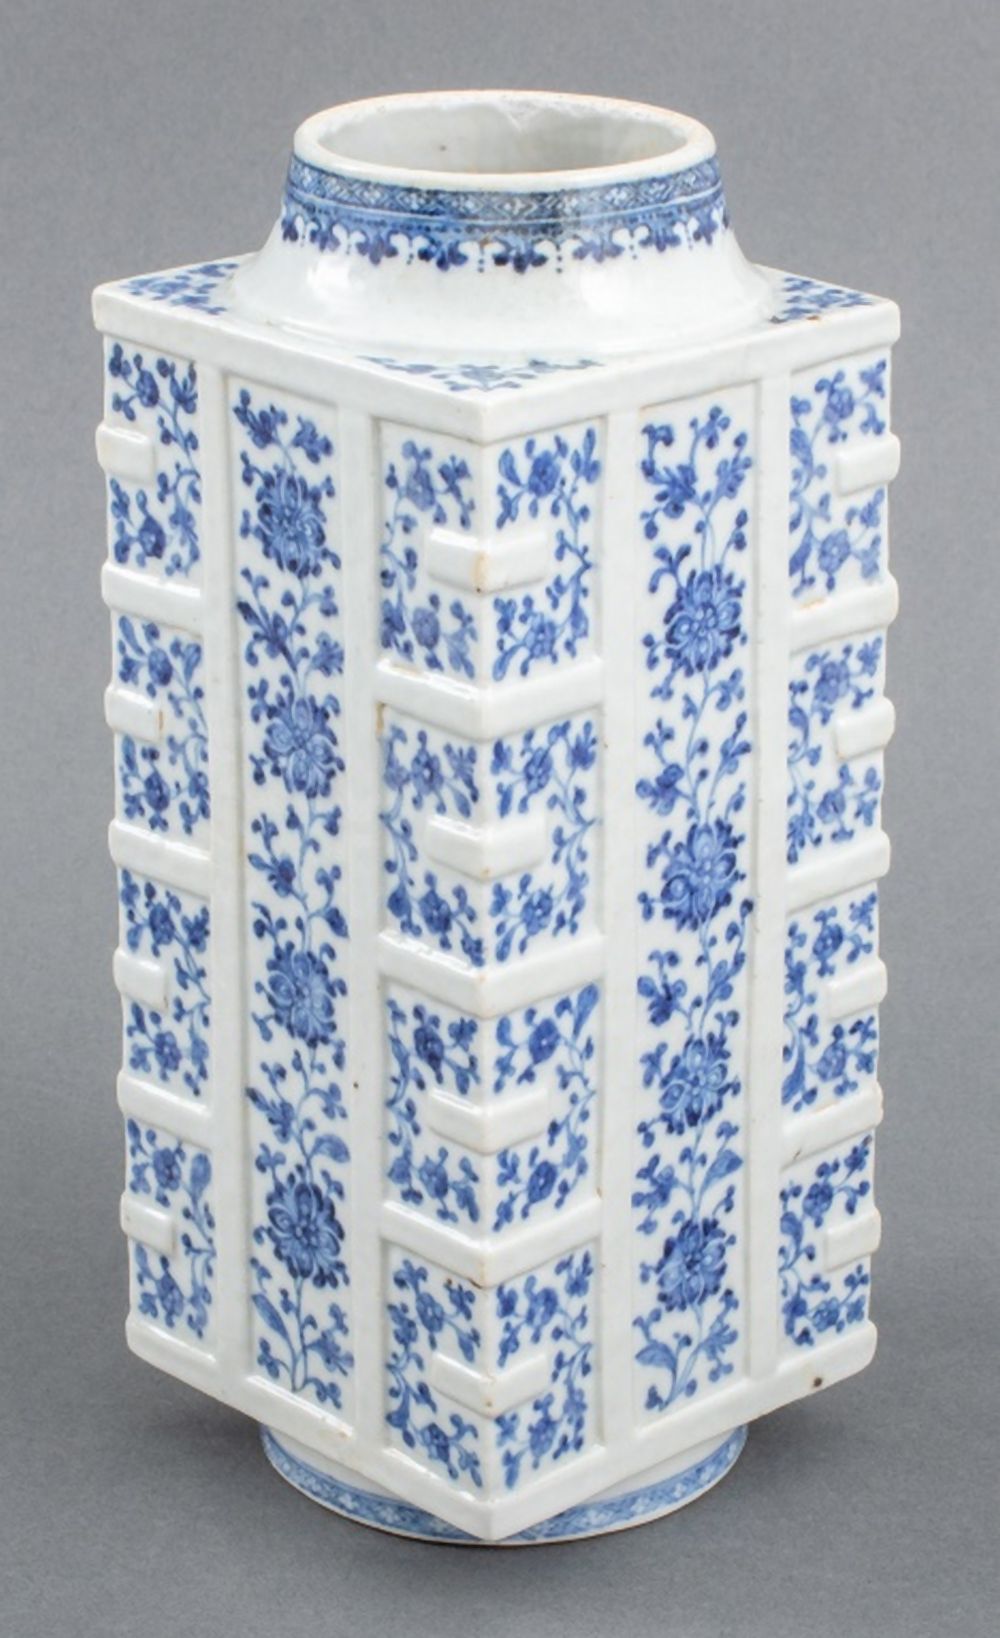 CHINESE BLUE & WHITE PORCELAIN CONG